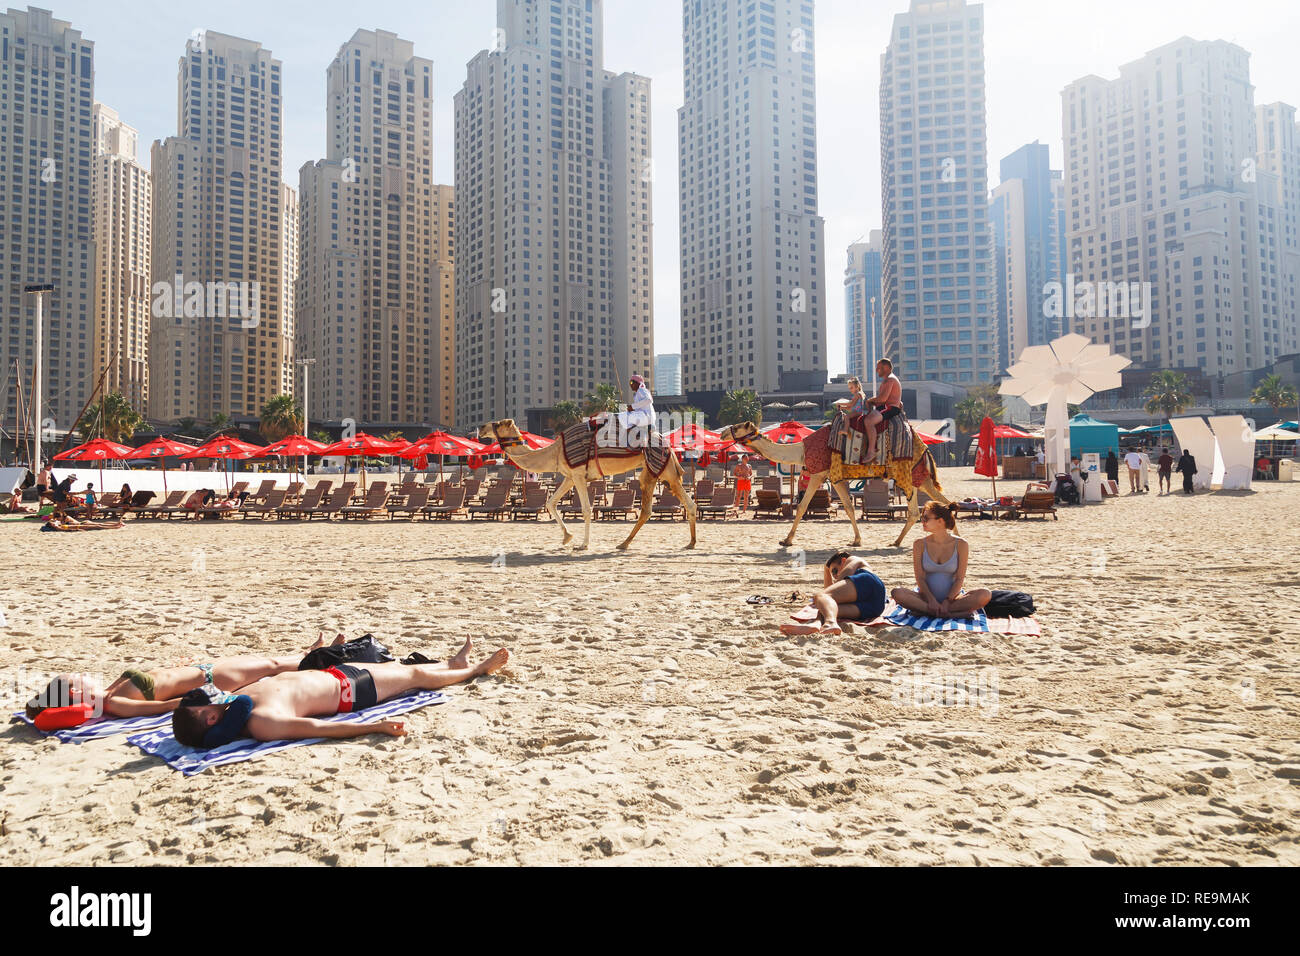 DUBAI, UAE - January 07, 2019: Camels and lying tourists on skyscrapers background at the beach Stock Photo